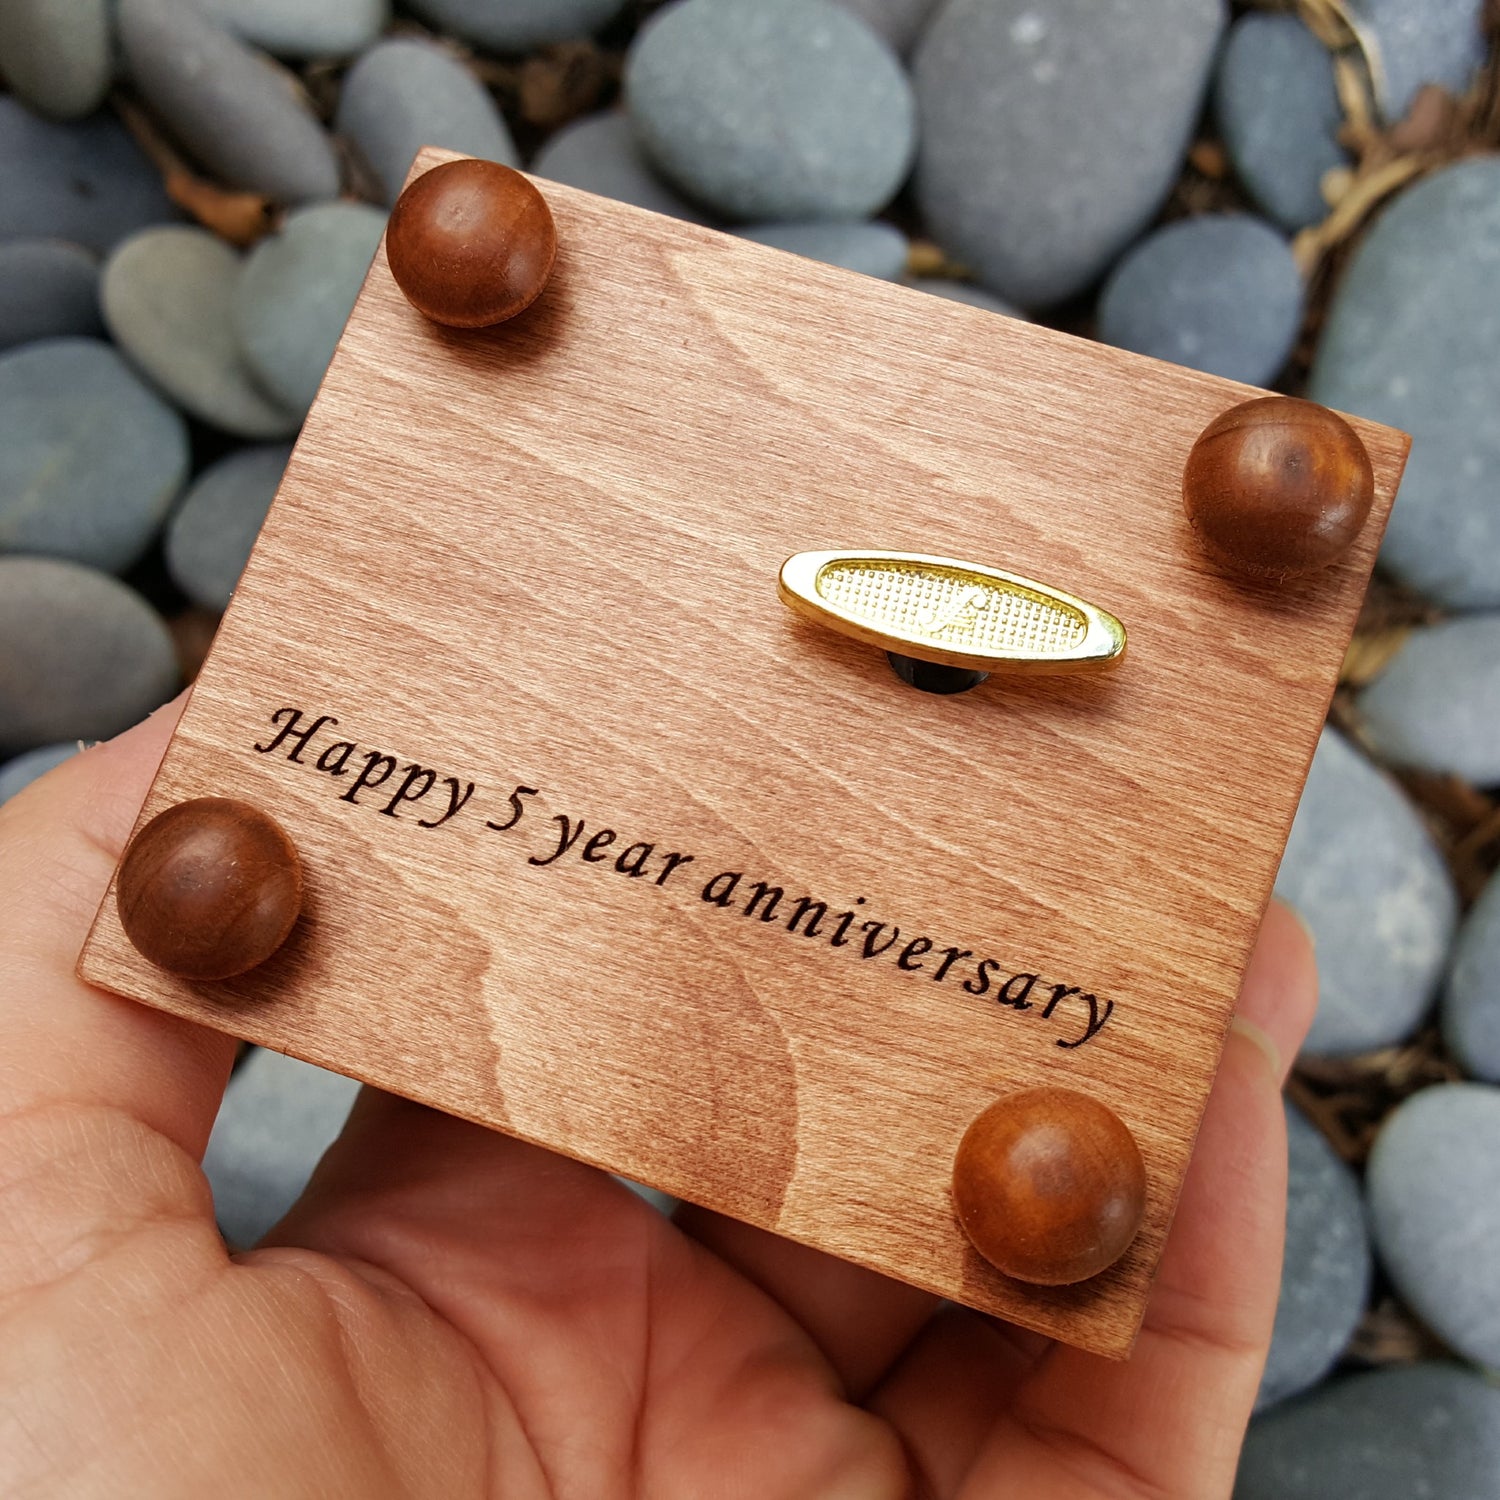 Happy 5th anniversary, music box engraving personalized